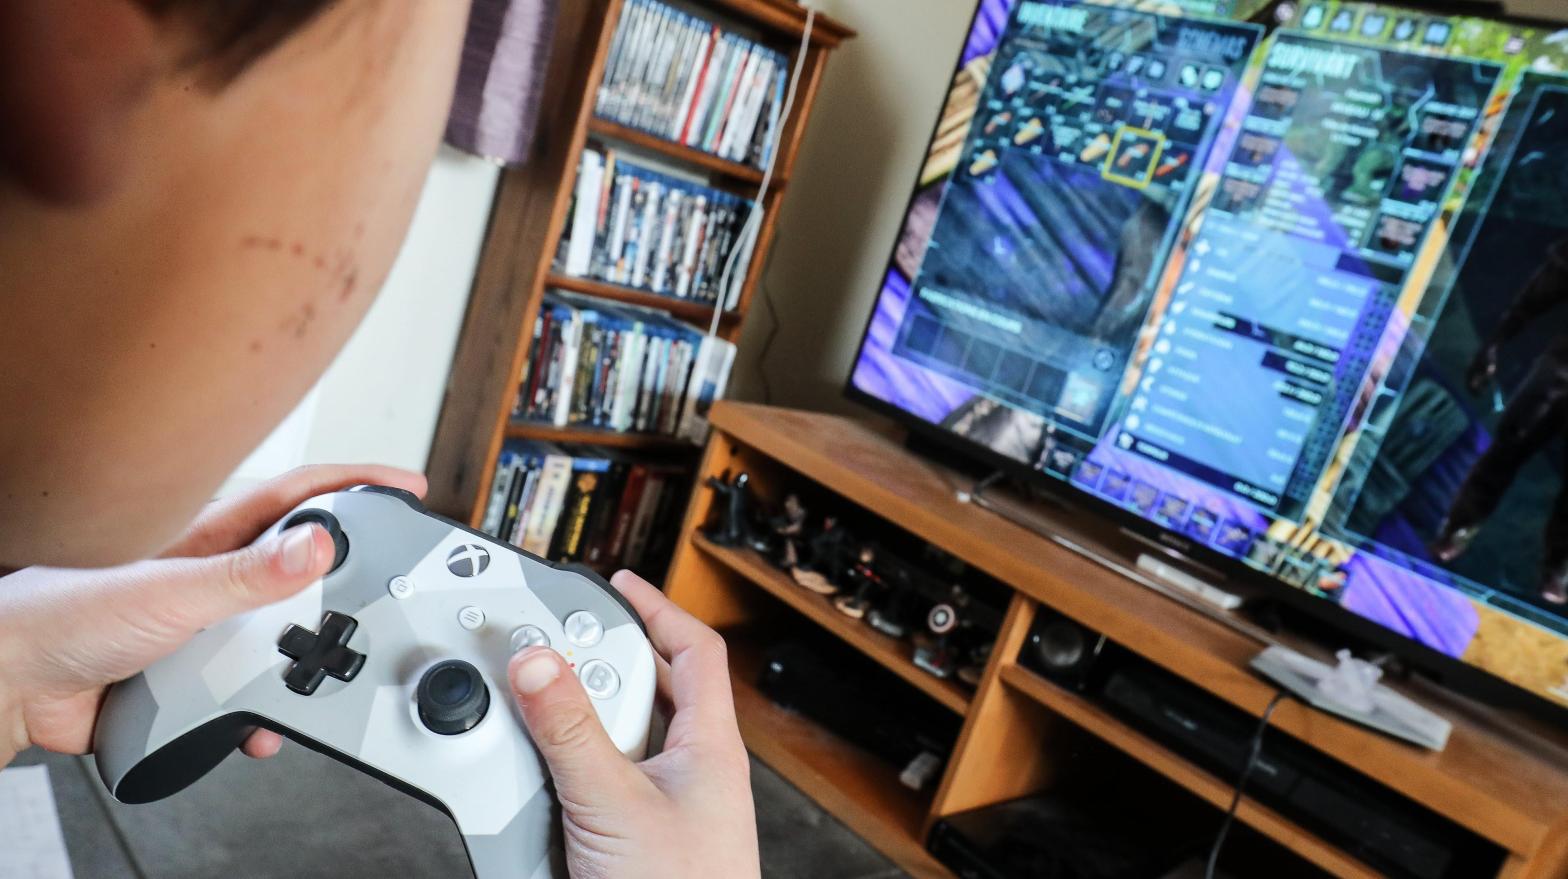 Xbox hopes to eschew expensive gaming hardware and allow cheaper access to its game library through its proposed full-streaming hardware. (Photo: BRUNO FAHY/BELGA MAG/AFP, Getty Images)